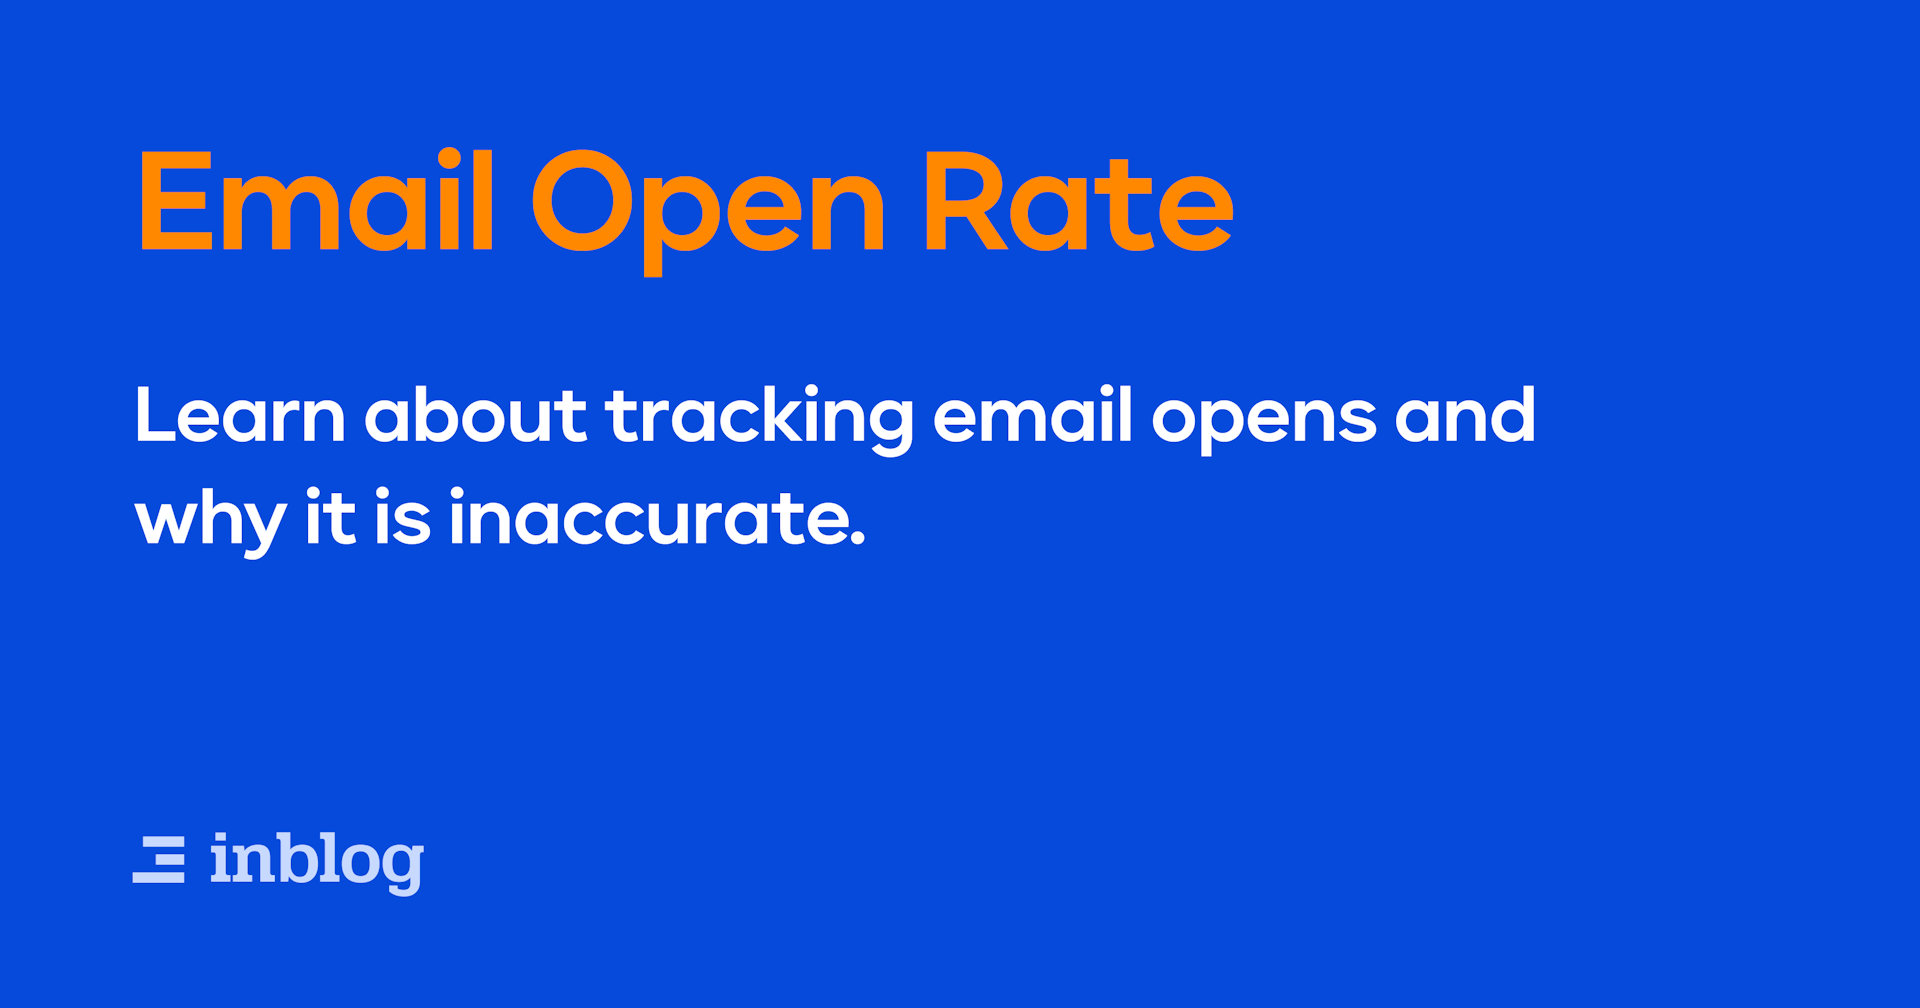 Email Open Rate, is it accurate?